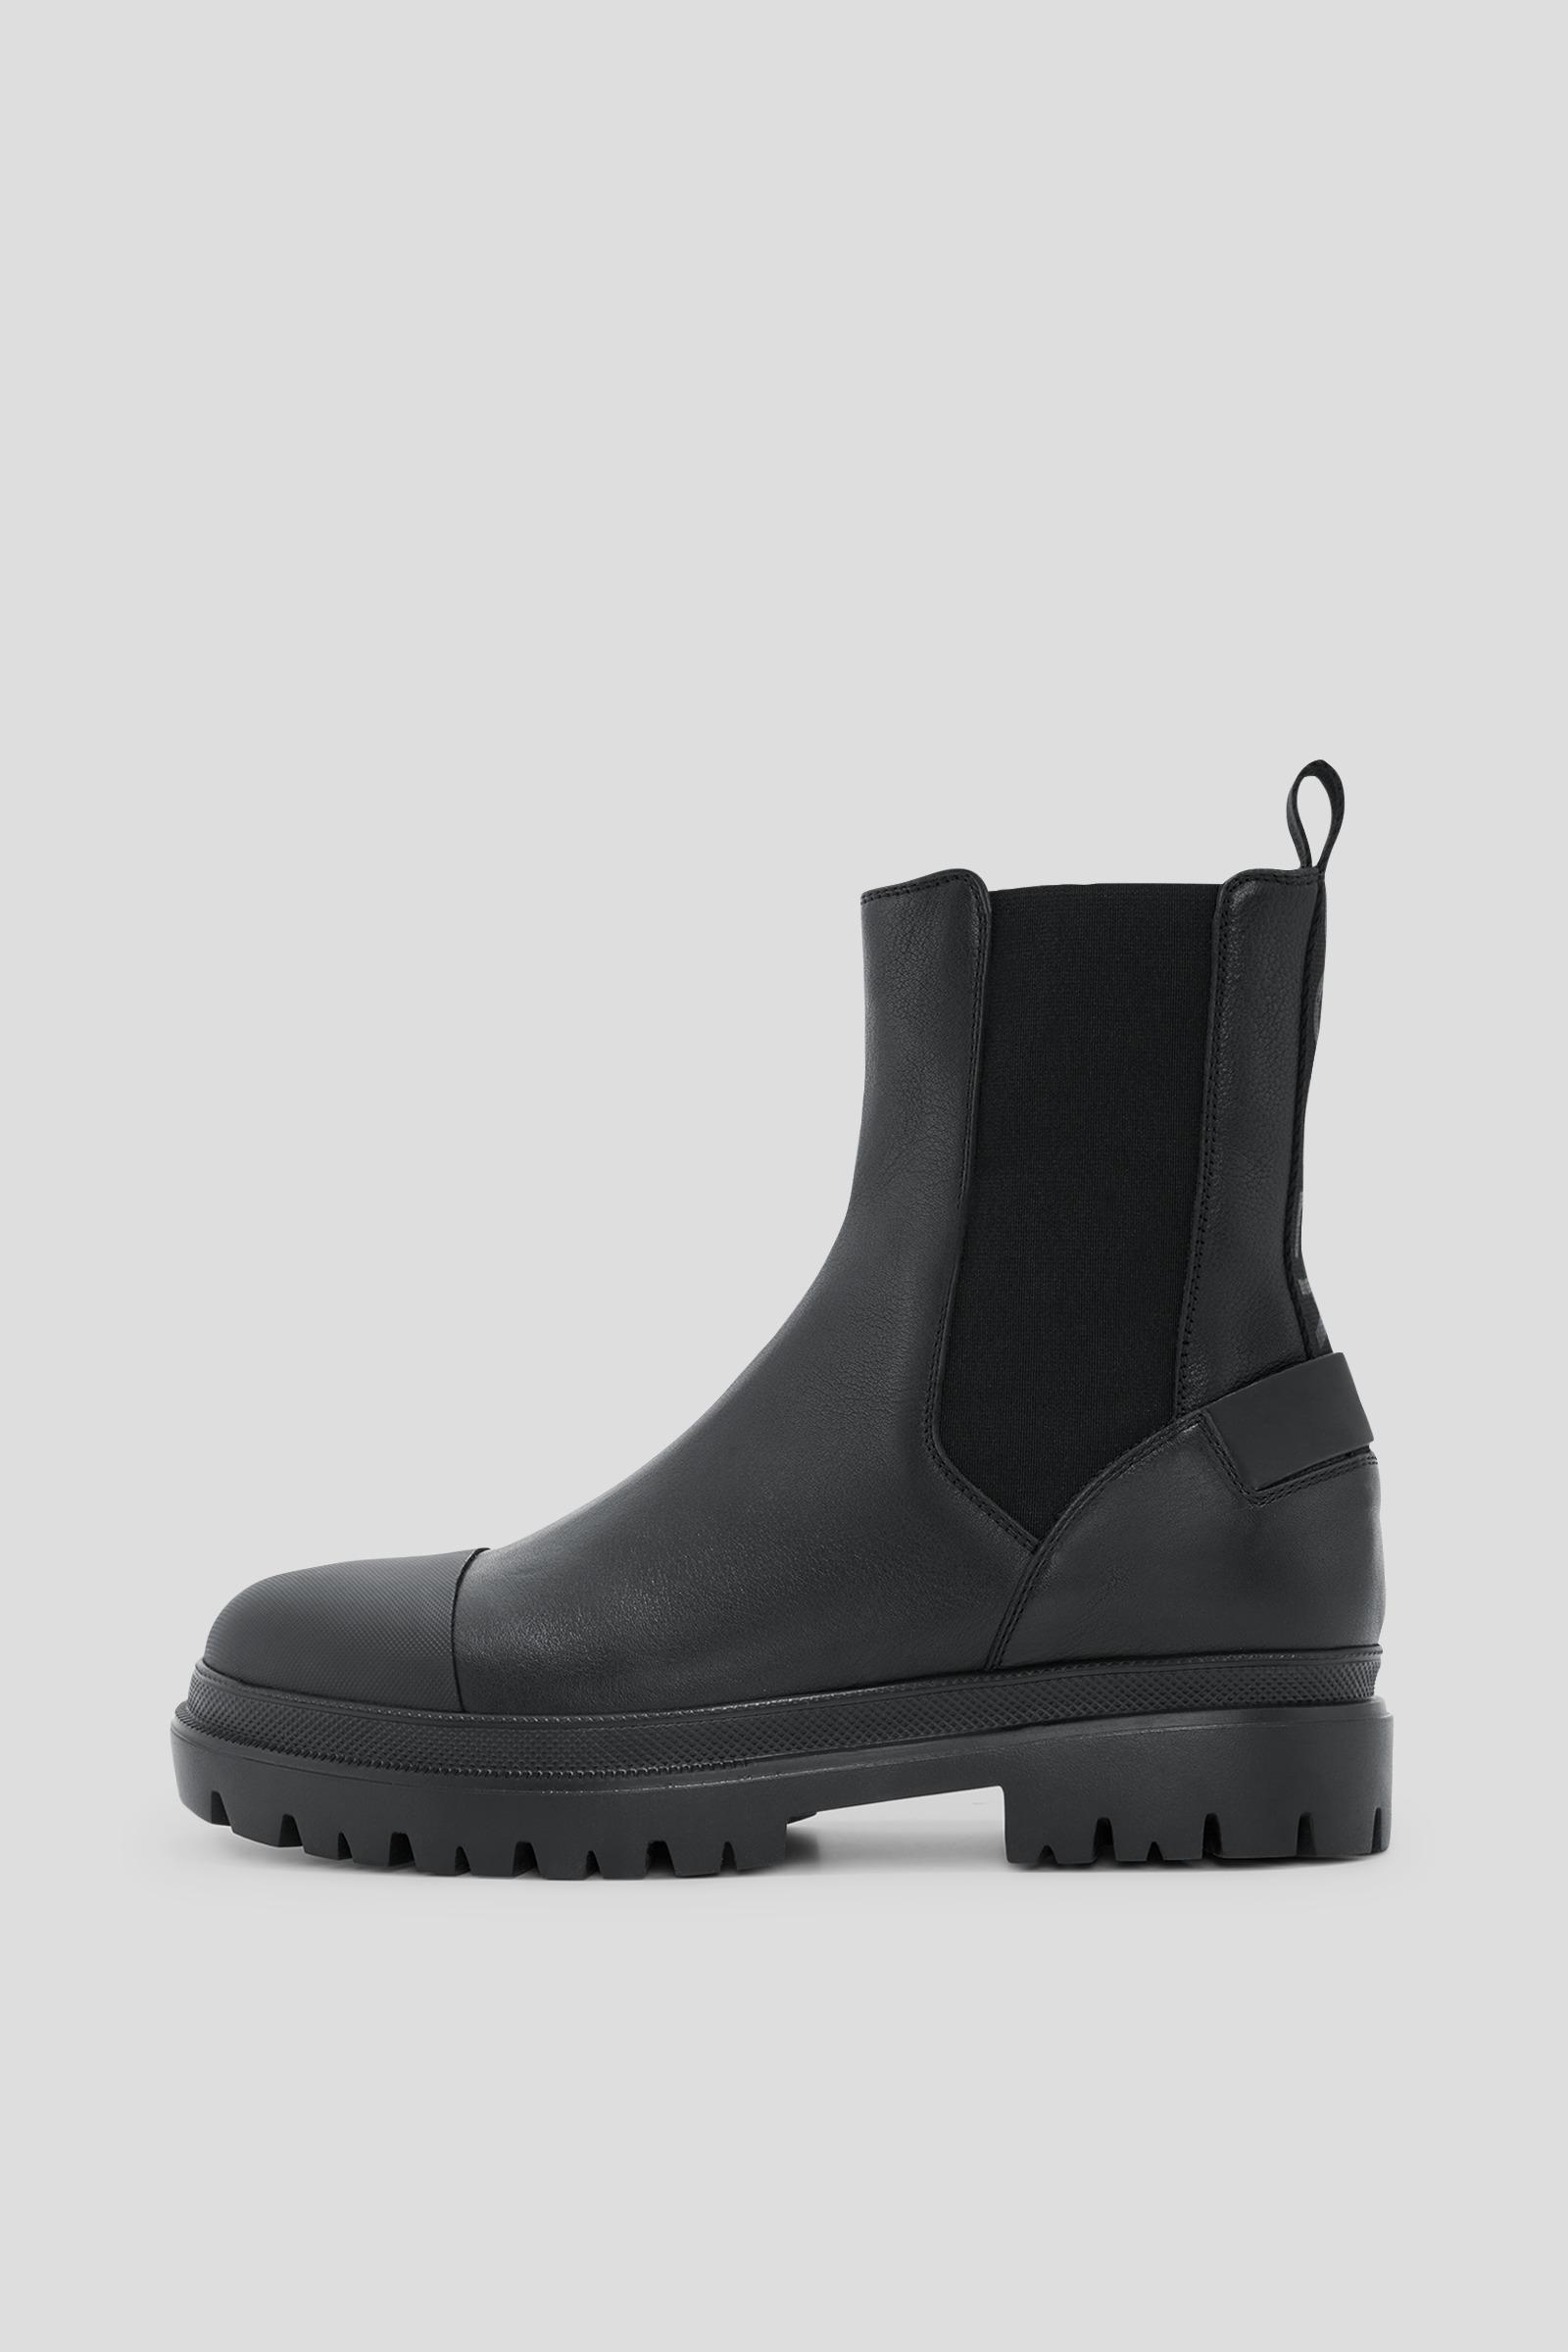 Bogner Leather Chesa Alpina Chelsea Boots in Black for Men | Lyst